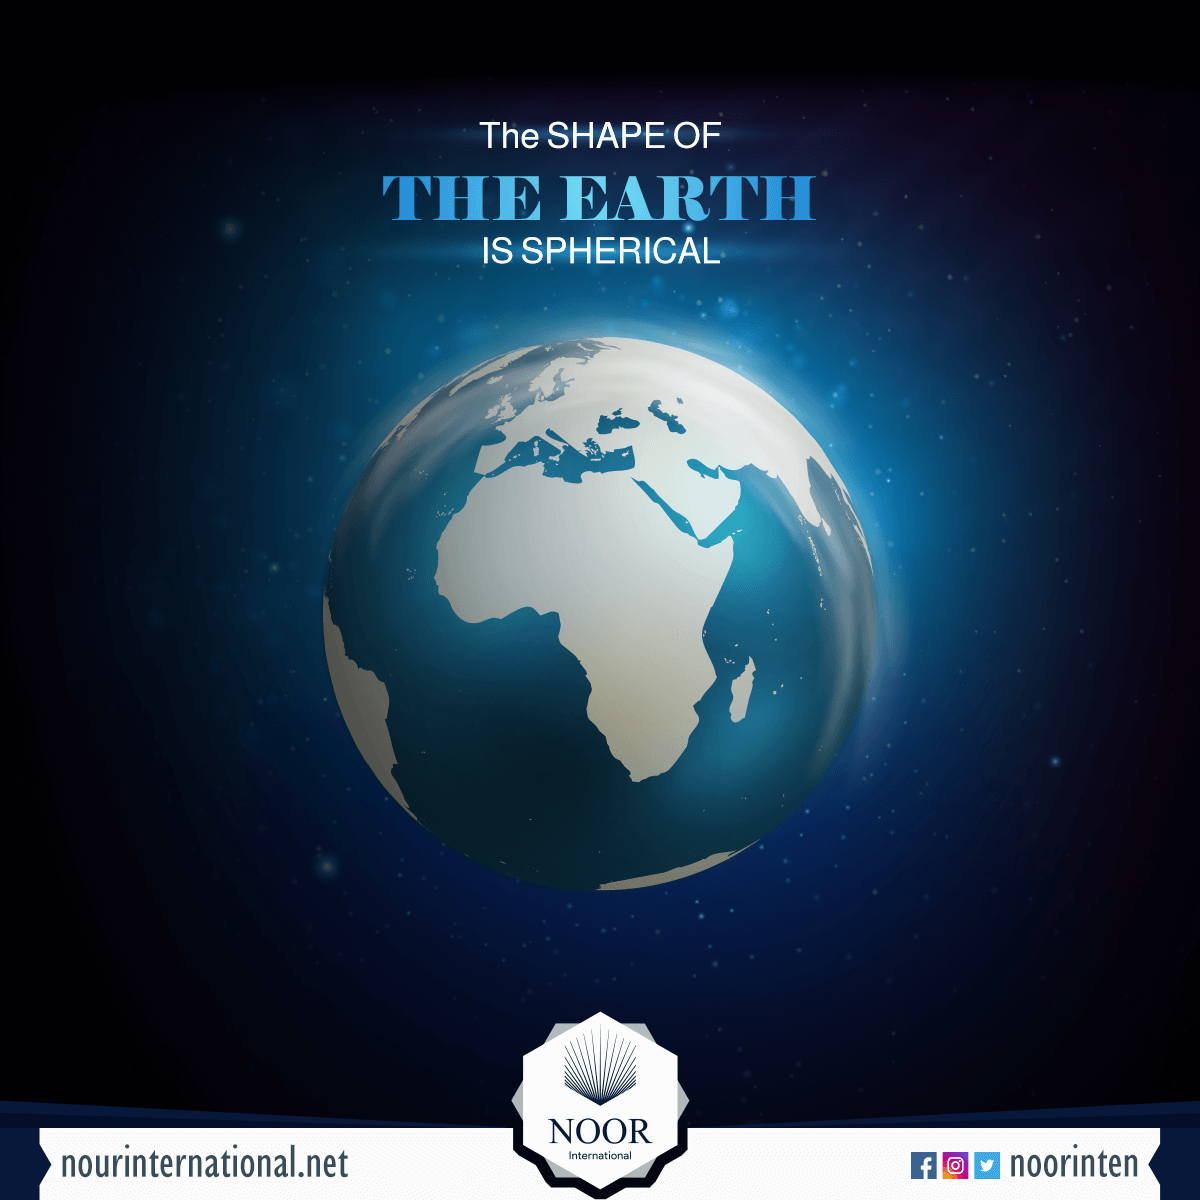 The SHAPE OF THE EARTH IS SPHERICAL